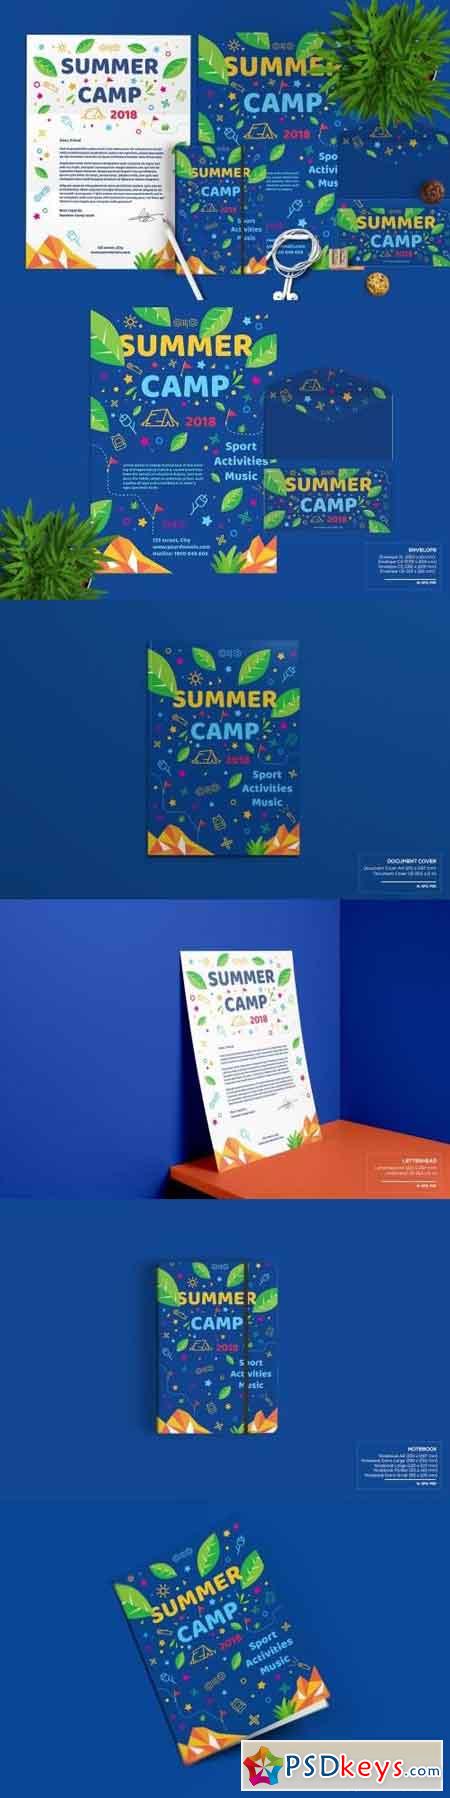 Summer Camp-Print Pack Template